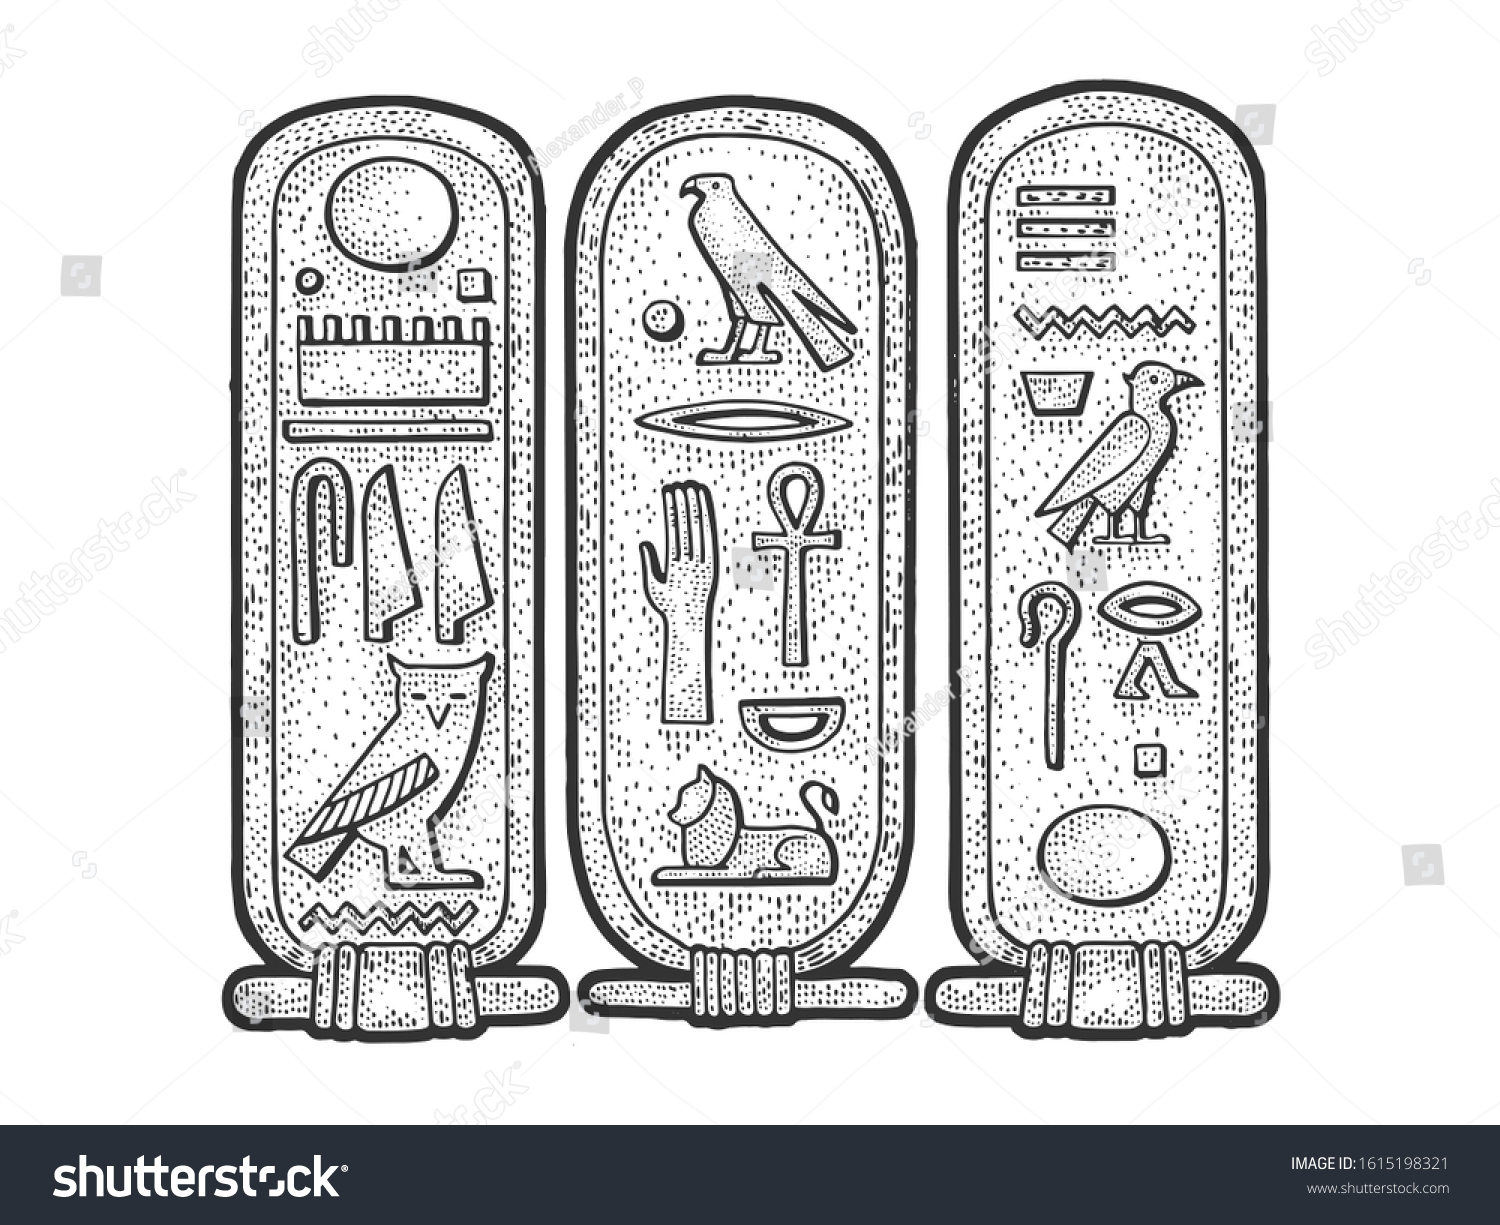 Ancient Egyptian Cartouche sketch engraving vector illustration. T-shirt apparel print design. Scratch board imitation. Black and white hand drawn image. #1615198321